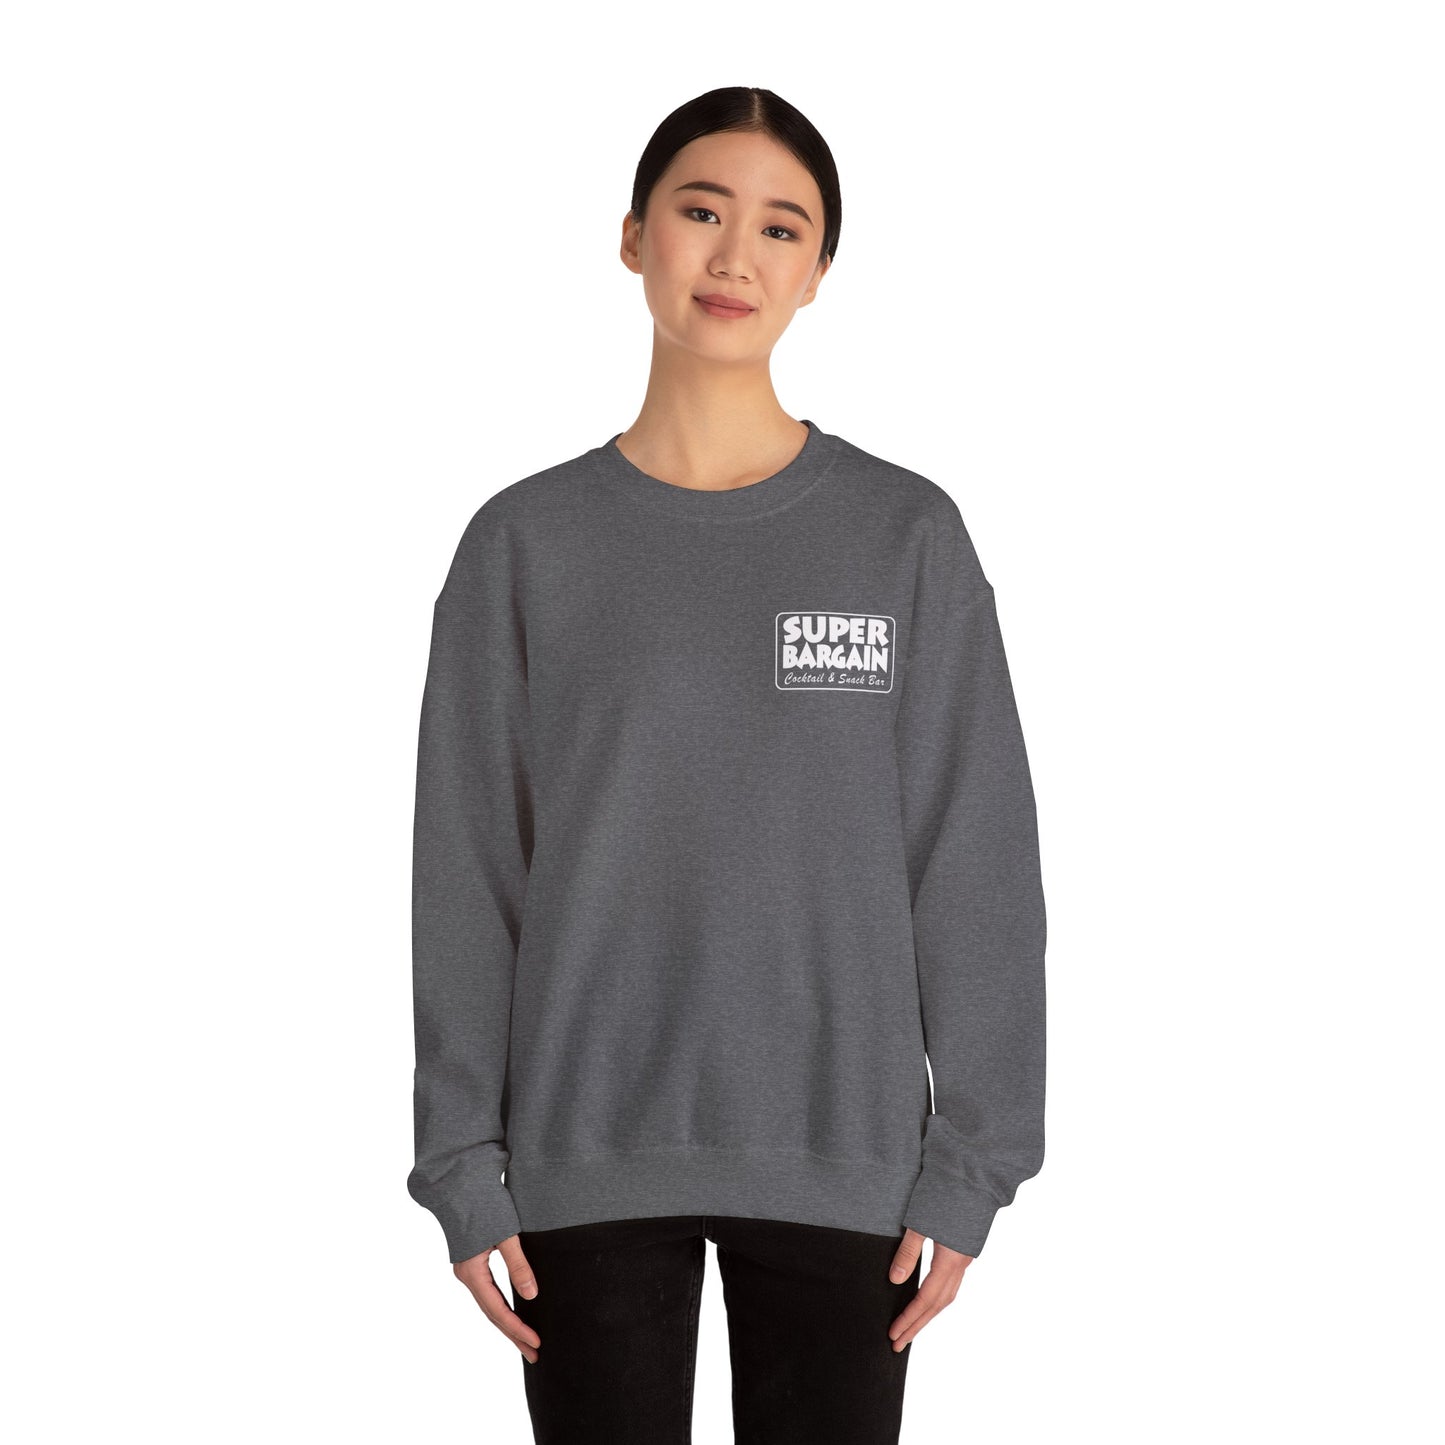 A woman wearing a gray Unisex Heavy Blend™ Crewneck Monochrome Logo Sweatshirt with the text "SUPER BARGAIN" on the front, standing against a white background in Cabbagetown, Toronto by Printify.